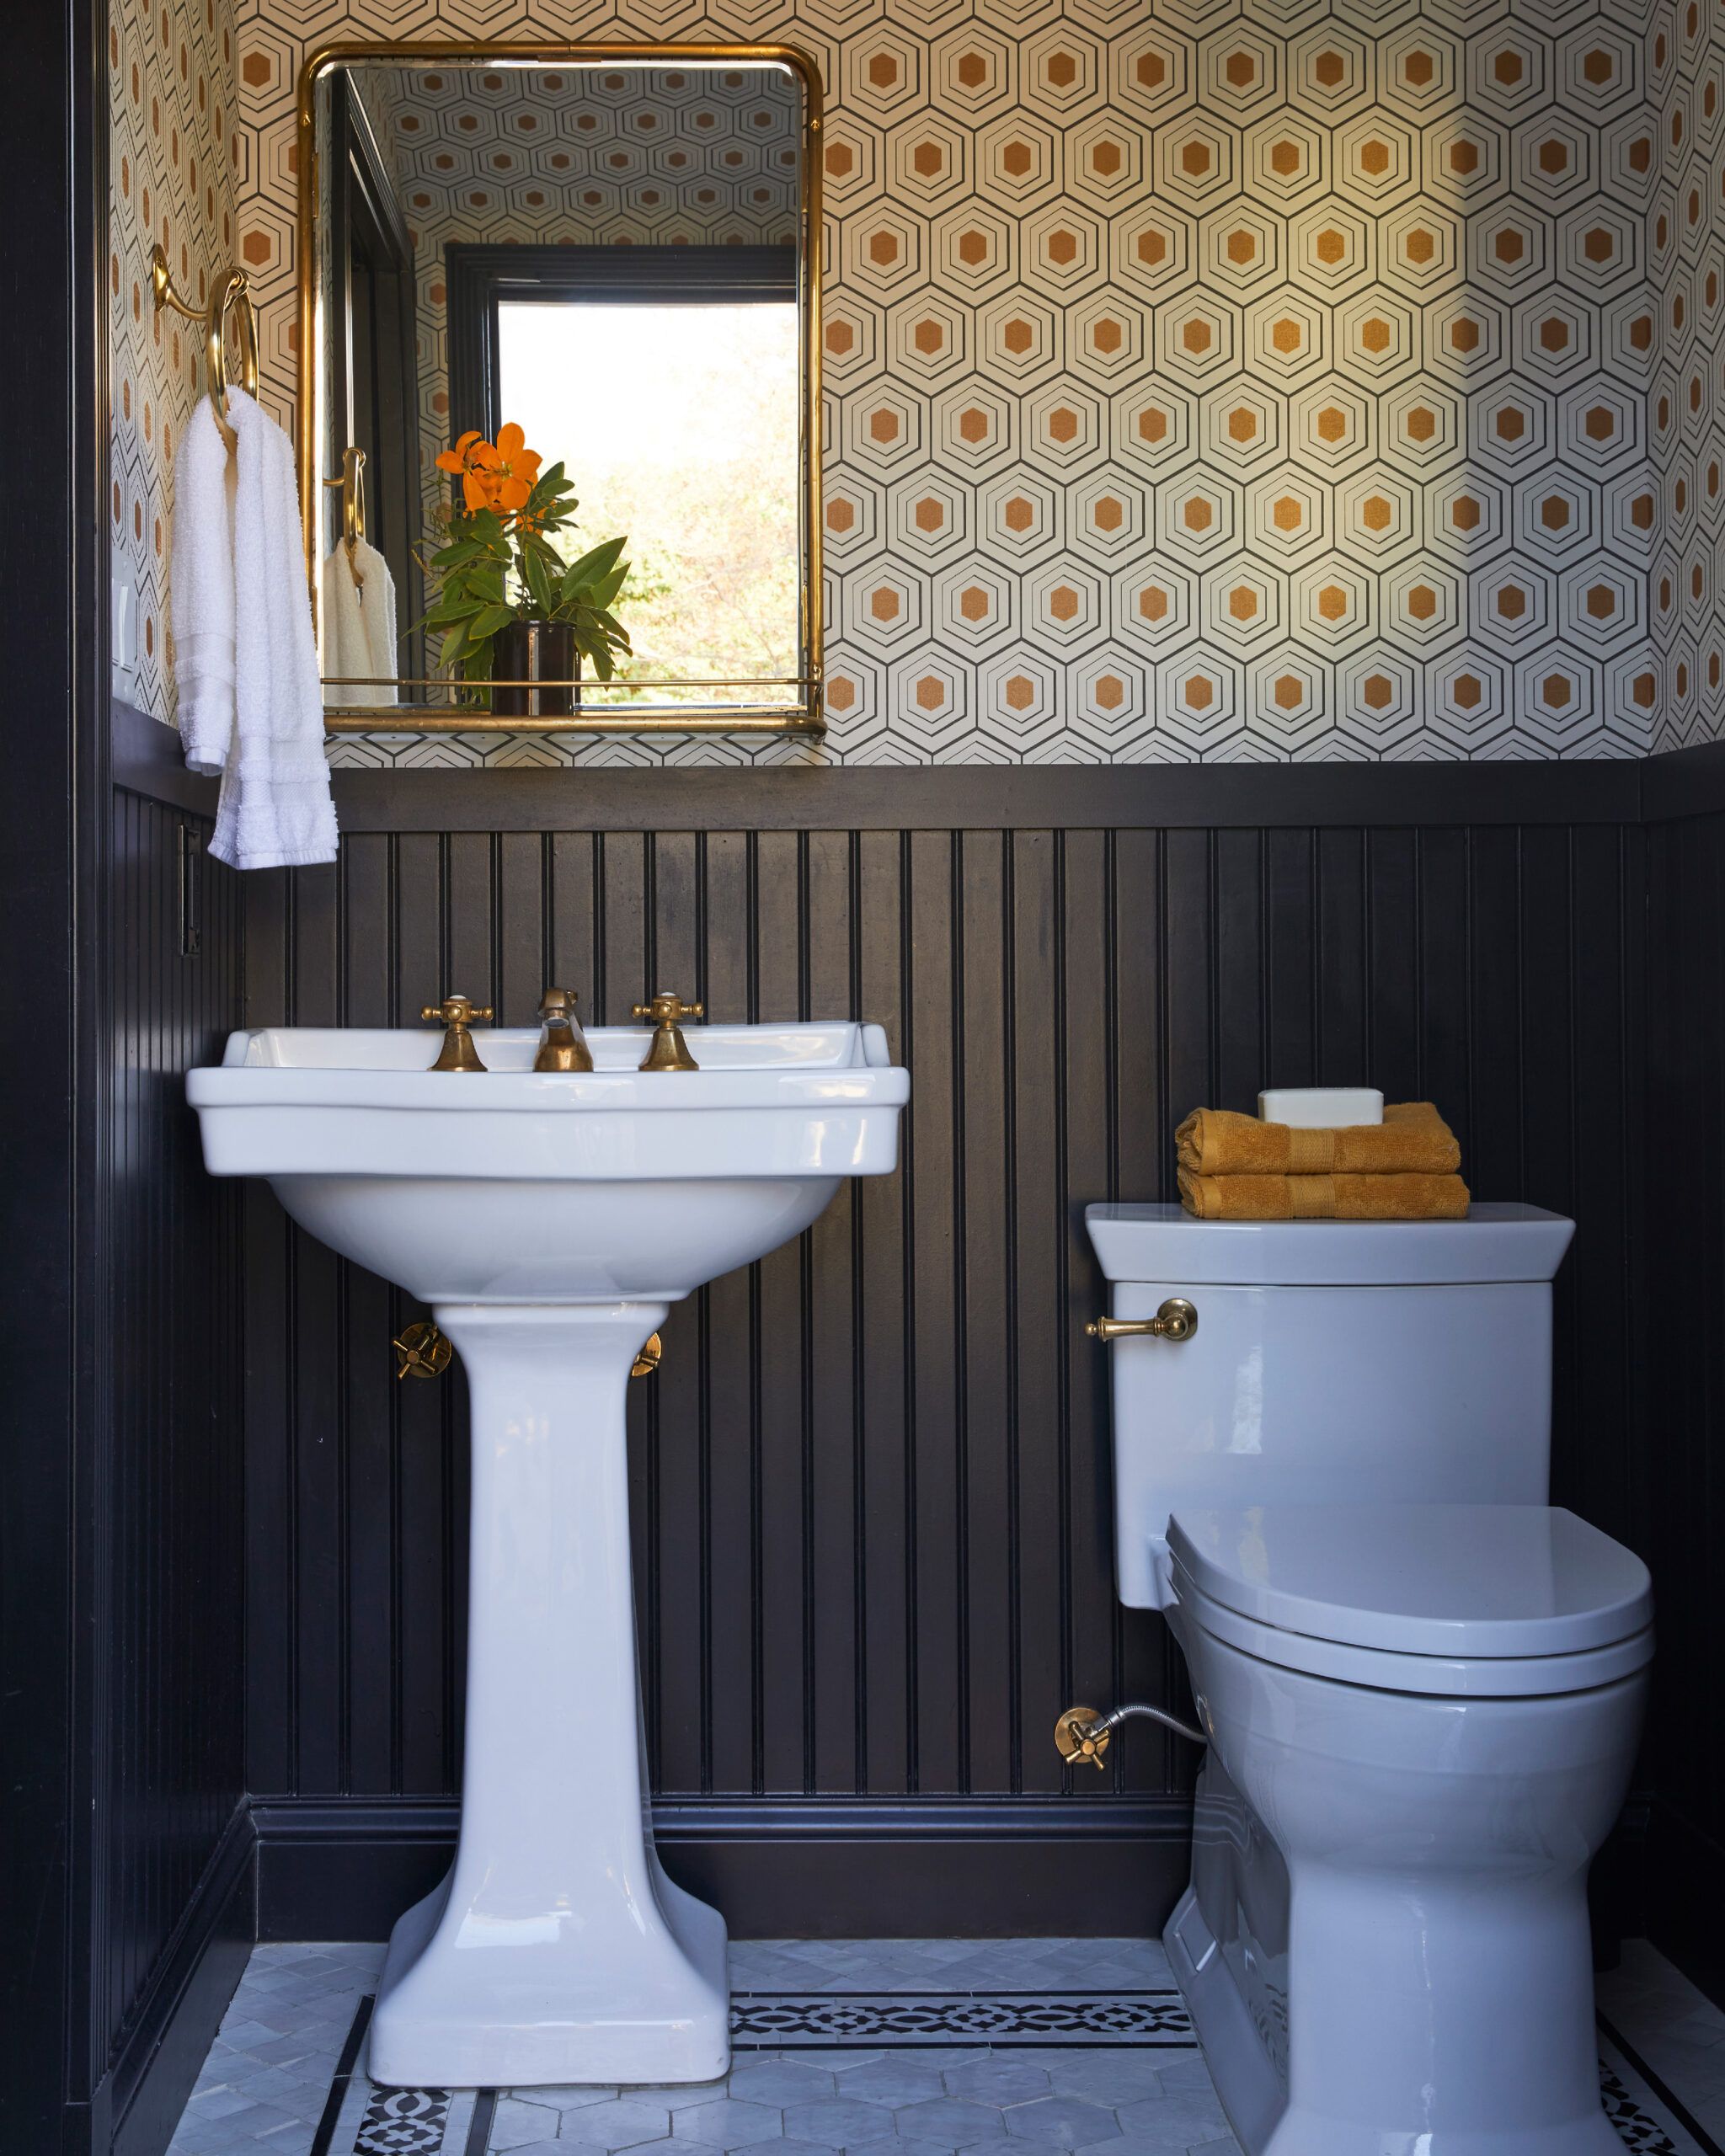 A traditional style pedestal sink and toilet in a powder room. 